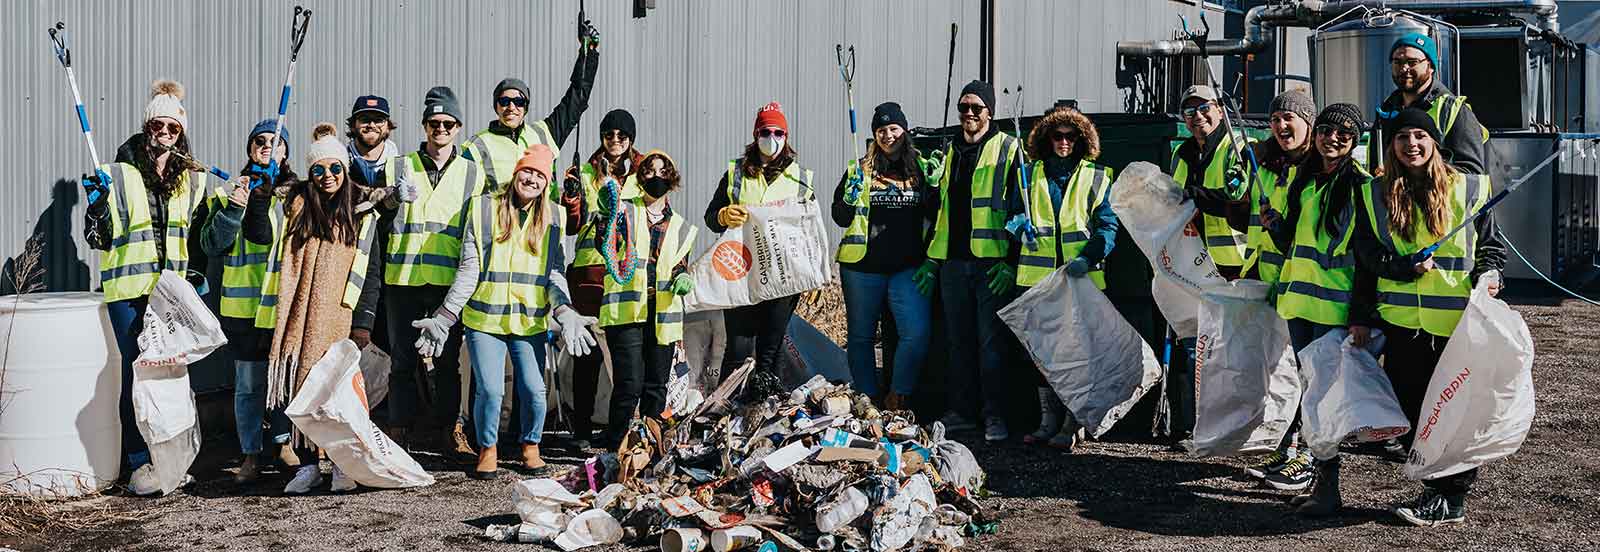 A group of volunteers at a Keep TN Beautiful cleanup event stand with reusable litter bags and litter pickers in front of a pile of trash at a litter cleanup.